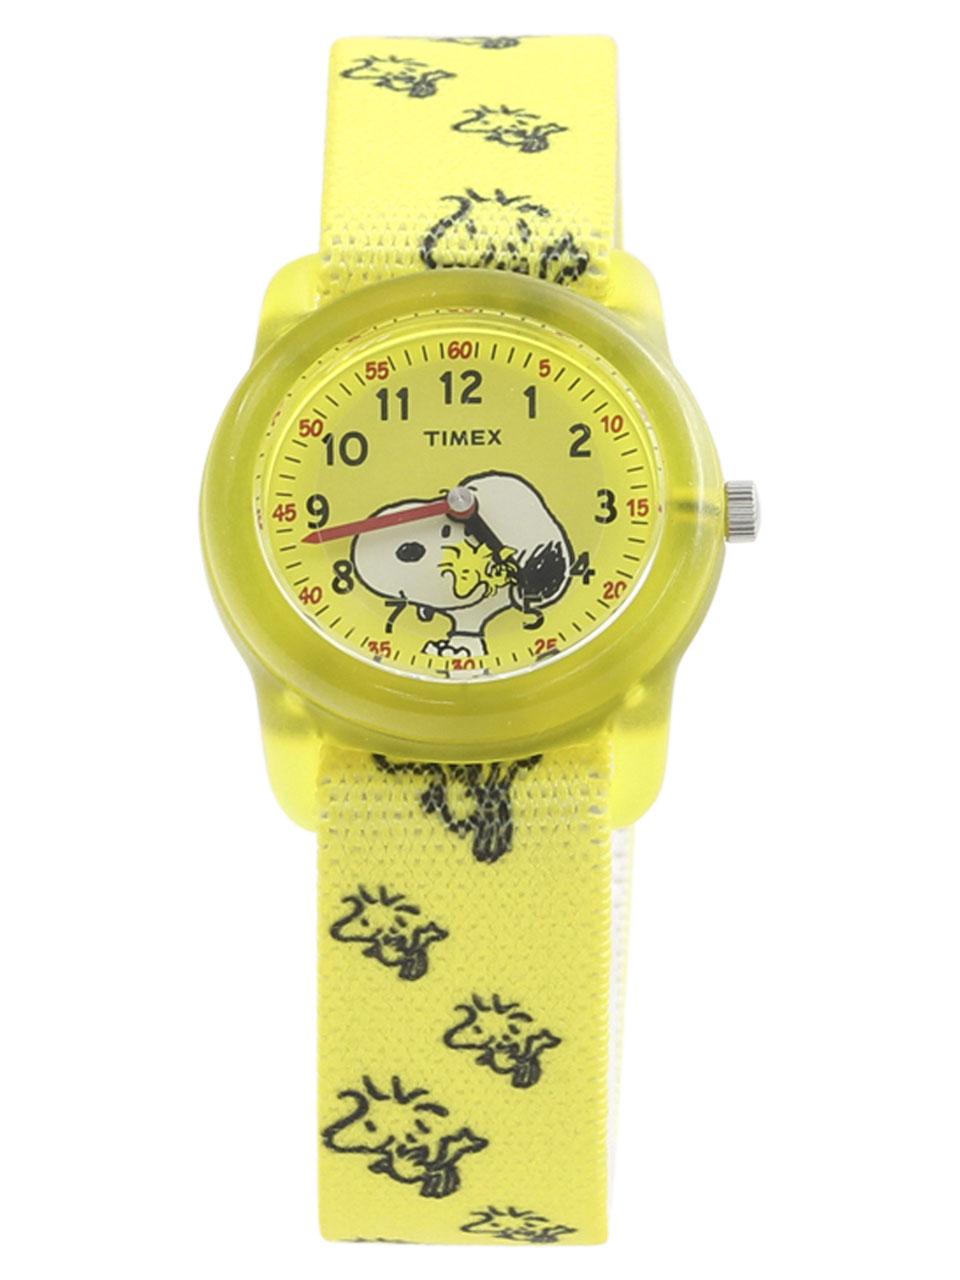 Timex Tw2r41500 Time Machines Peanuts Collection Snoopy Yellow Analog Watch